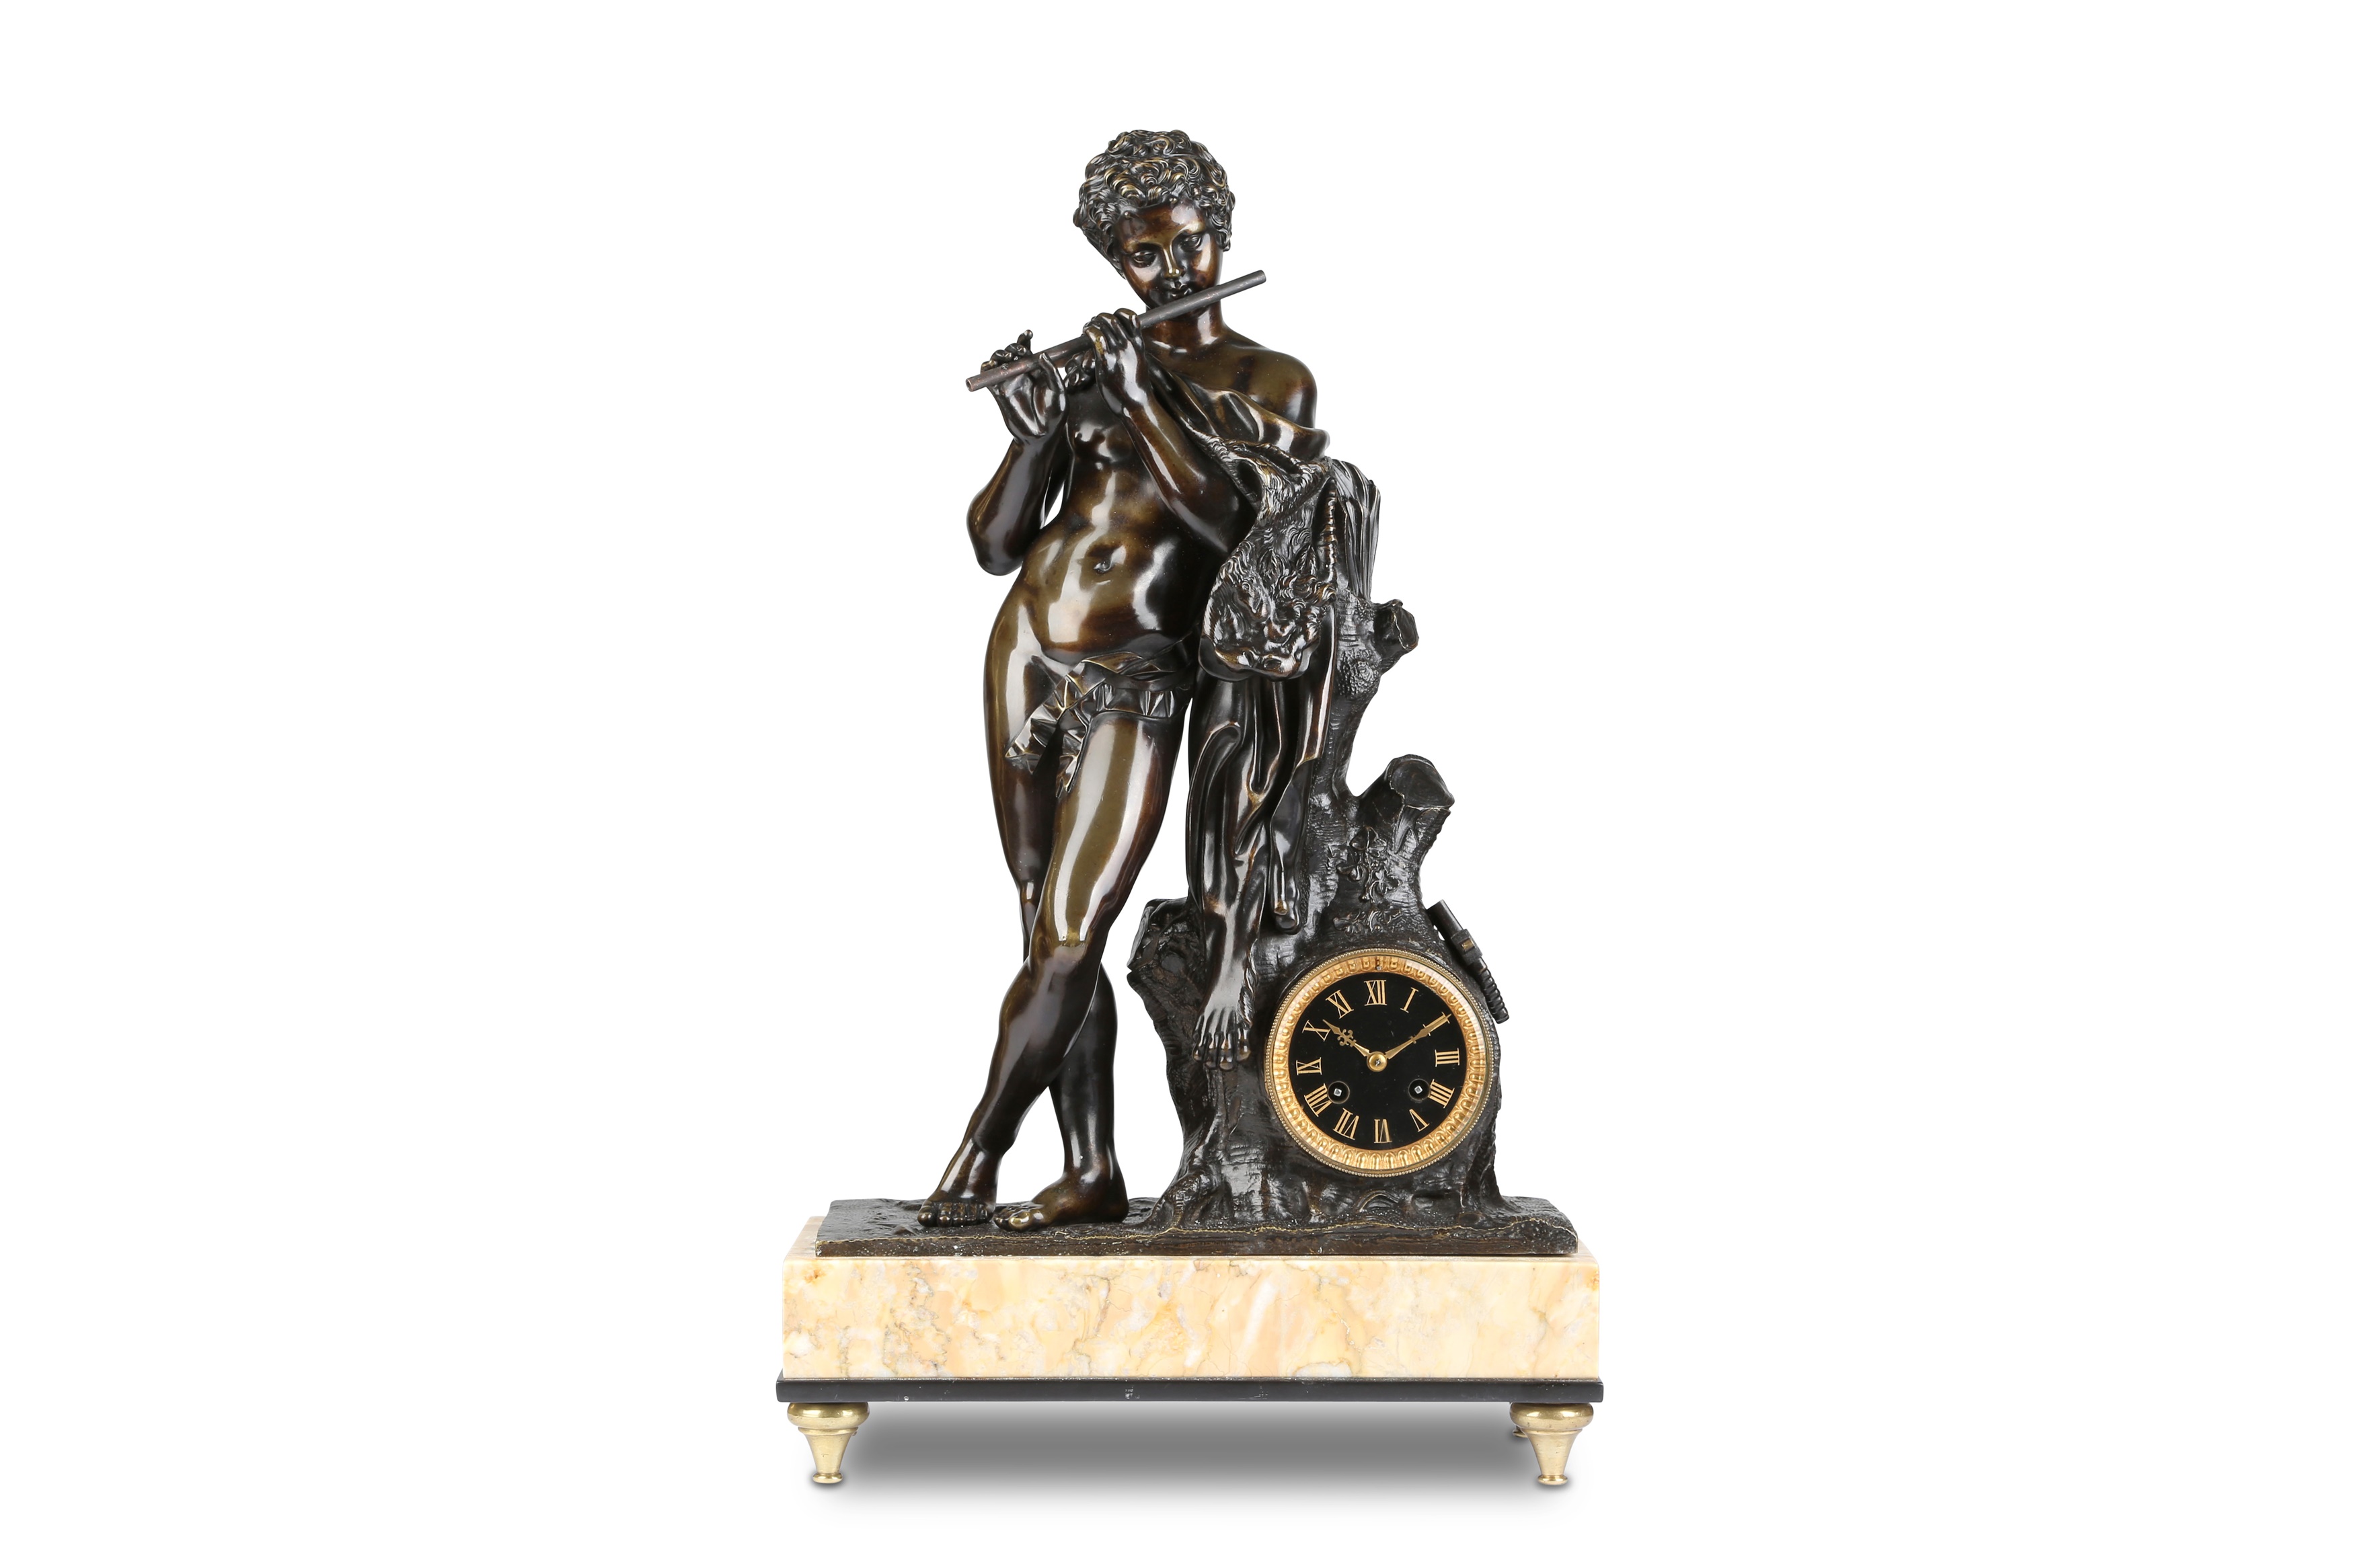 A LATE 19TH CENTURY FRENCH PATINATED BRONZE FIGURAL CLOCK DEPICTING A SATYR